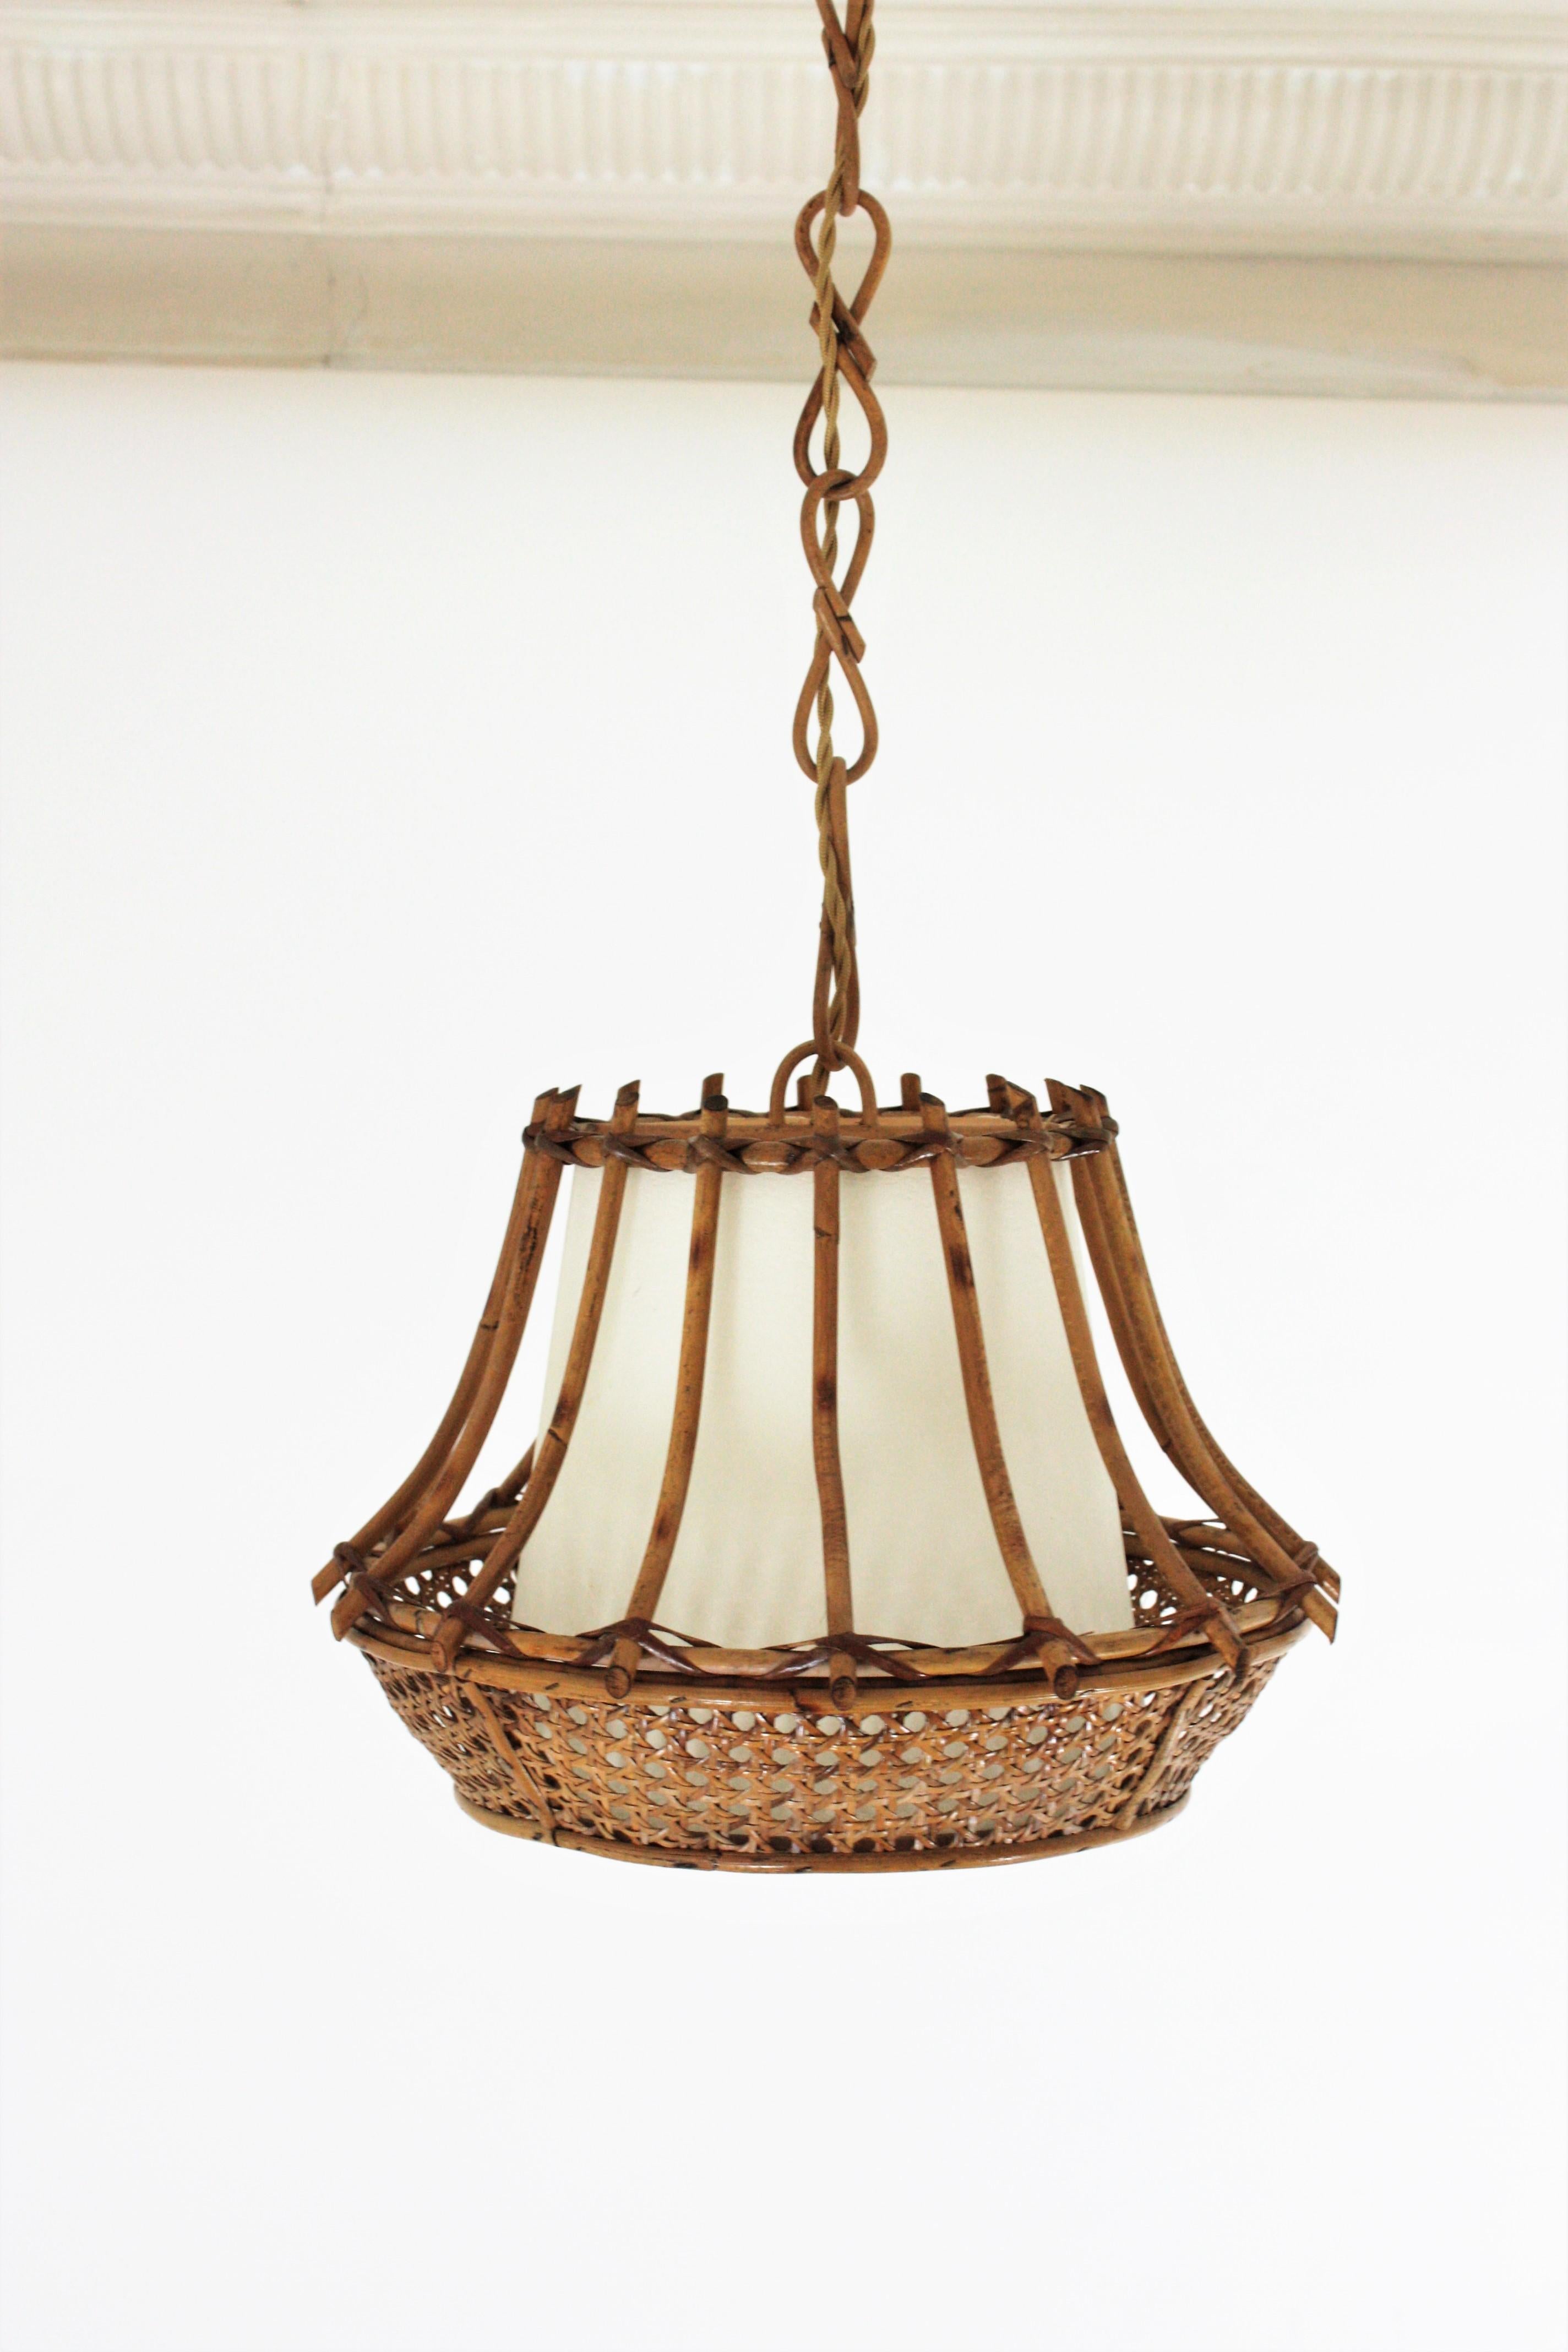 French Rattan Wicker Pagoda Pendant Light or Lantern For Sale